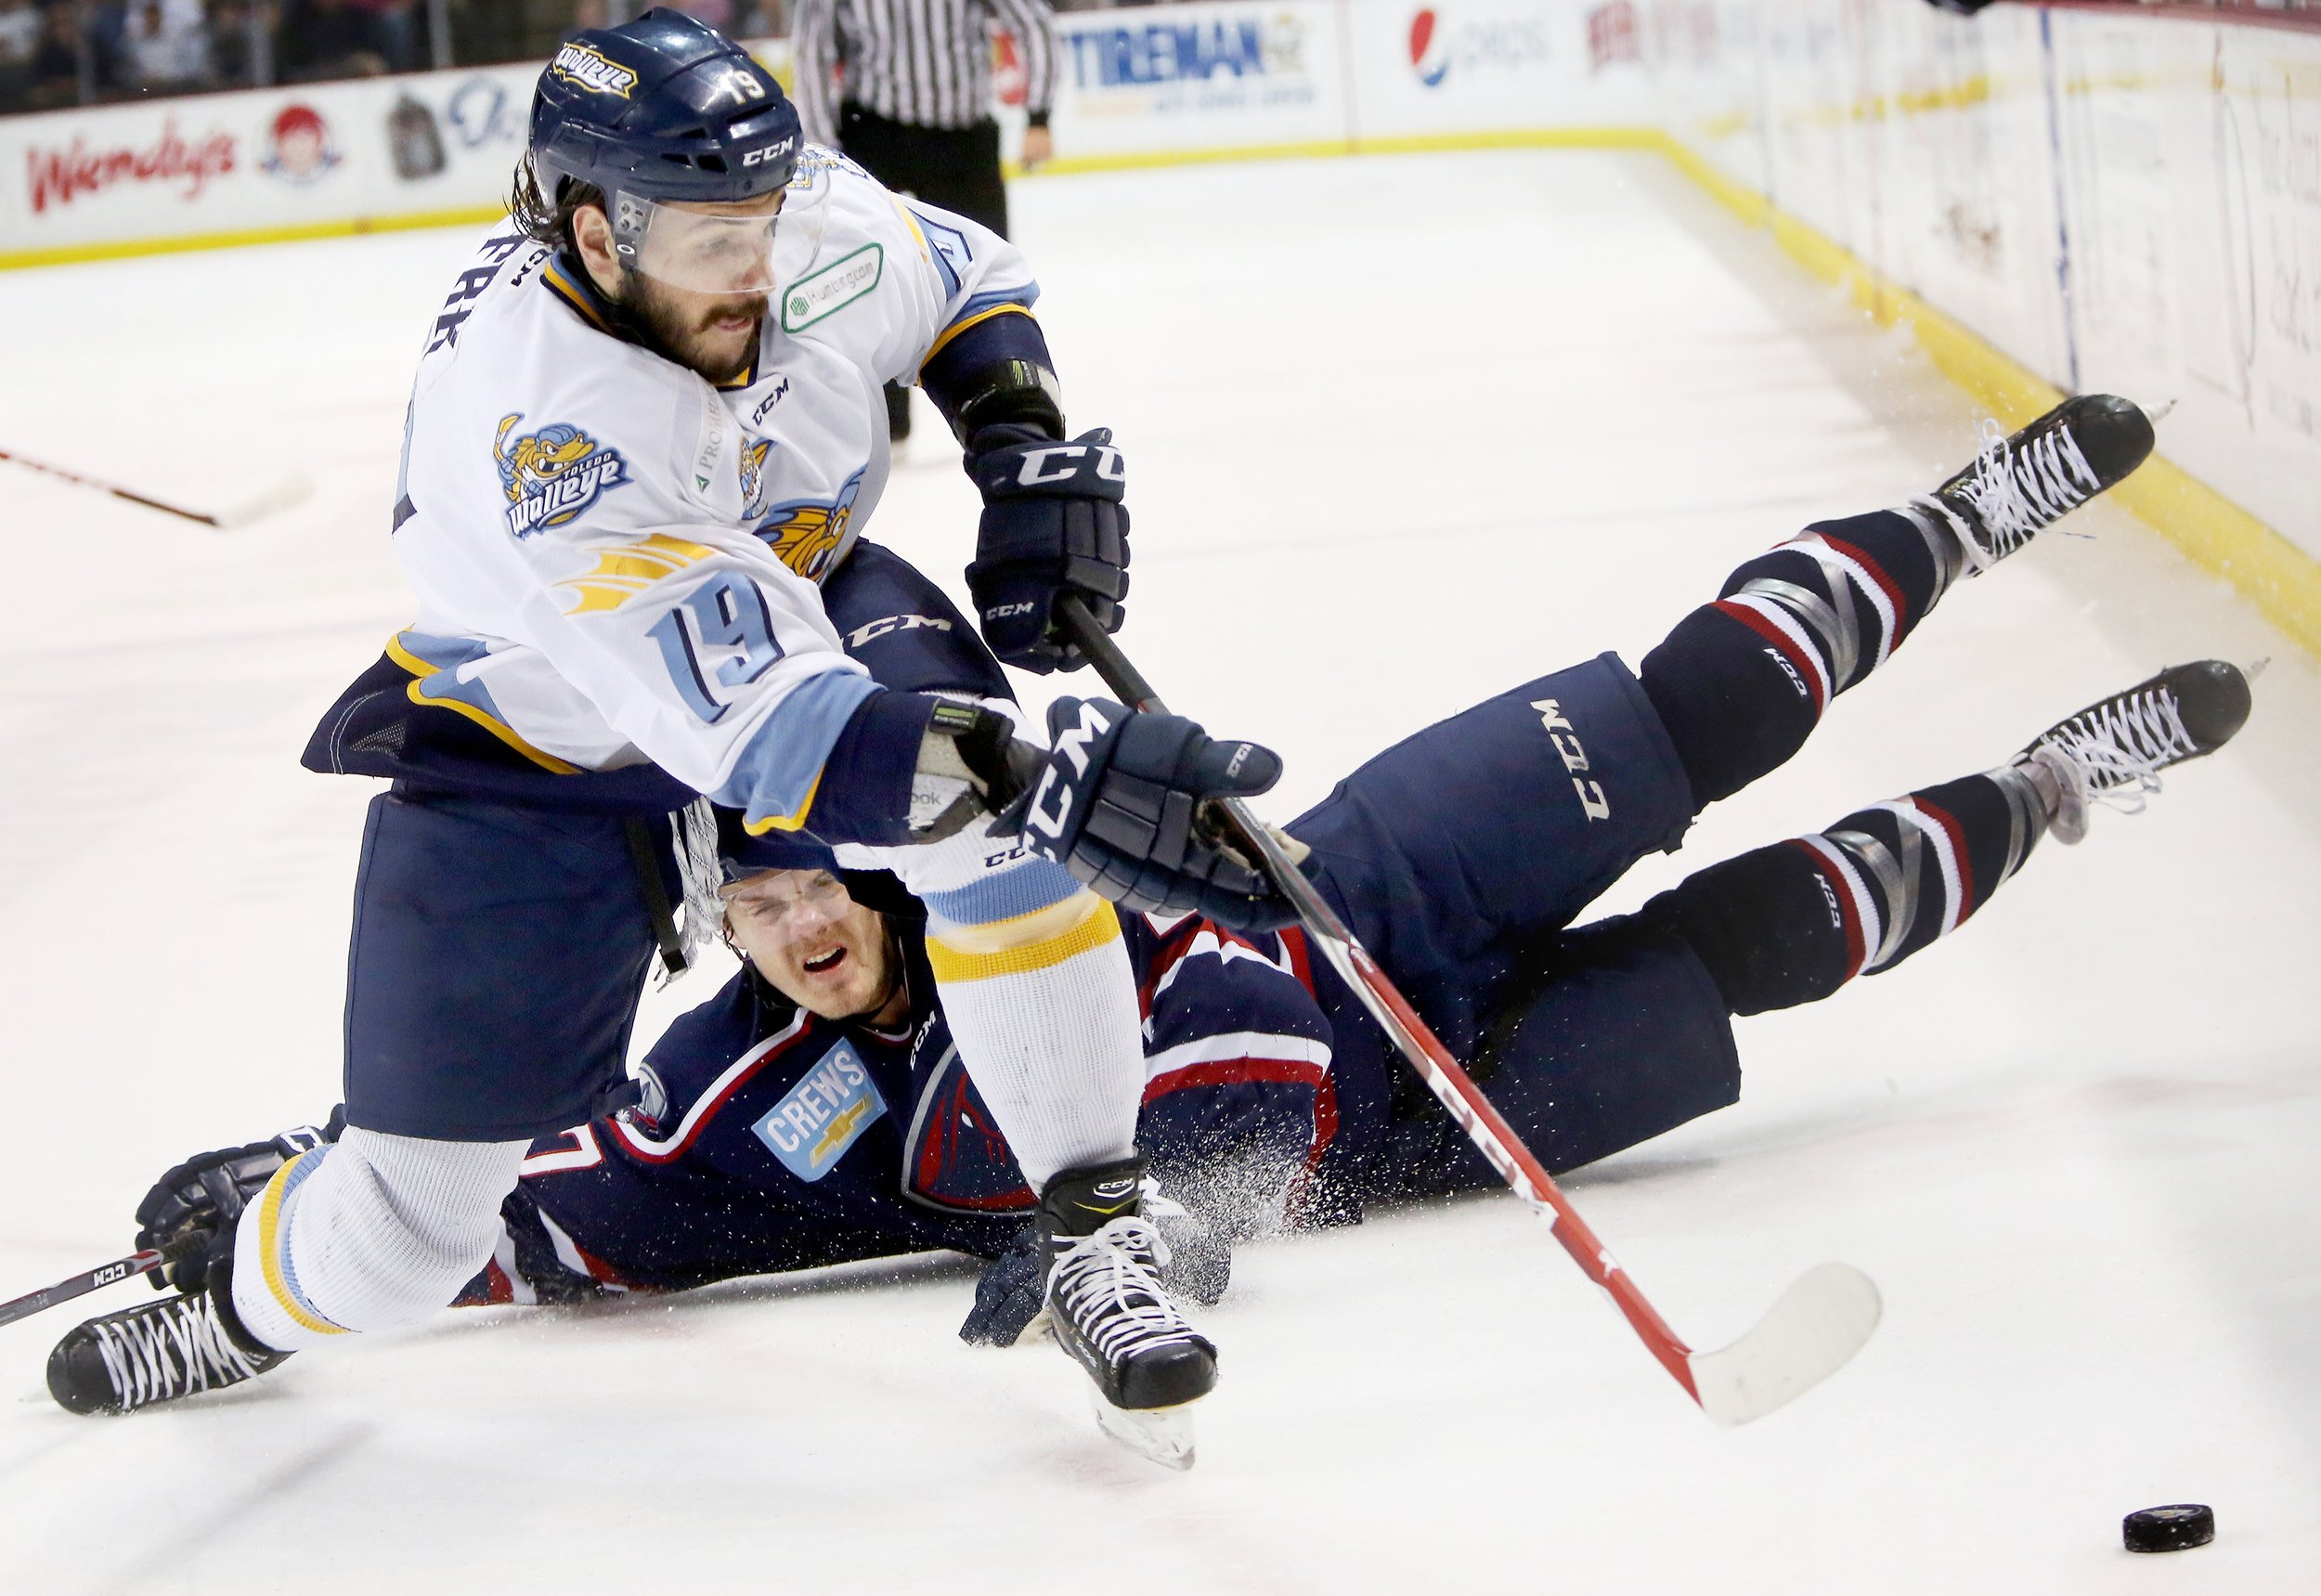  Toledo Walleye Martin Frk (19) bypasses fallen South Carolina Stingrays defender Wade Epp (27) in pursuit of the puck during the first period of the series Game 6 match up at the Huntington Center in downtown Toledo, Ohio, on May 26, 2015. 